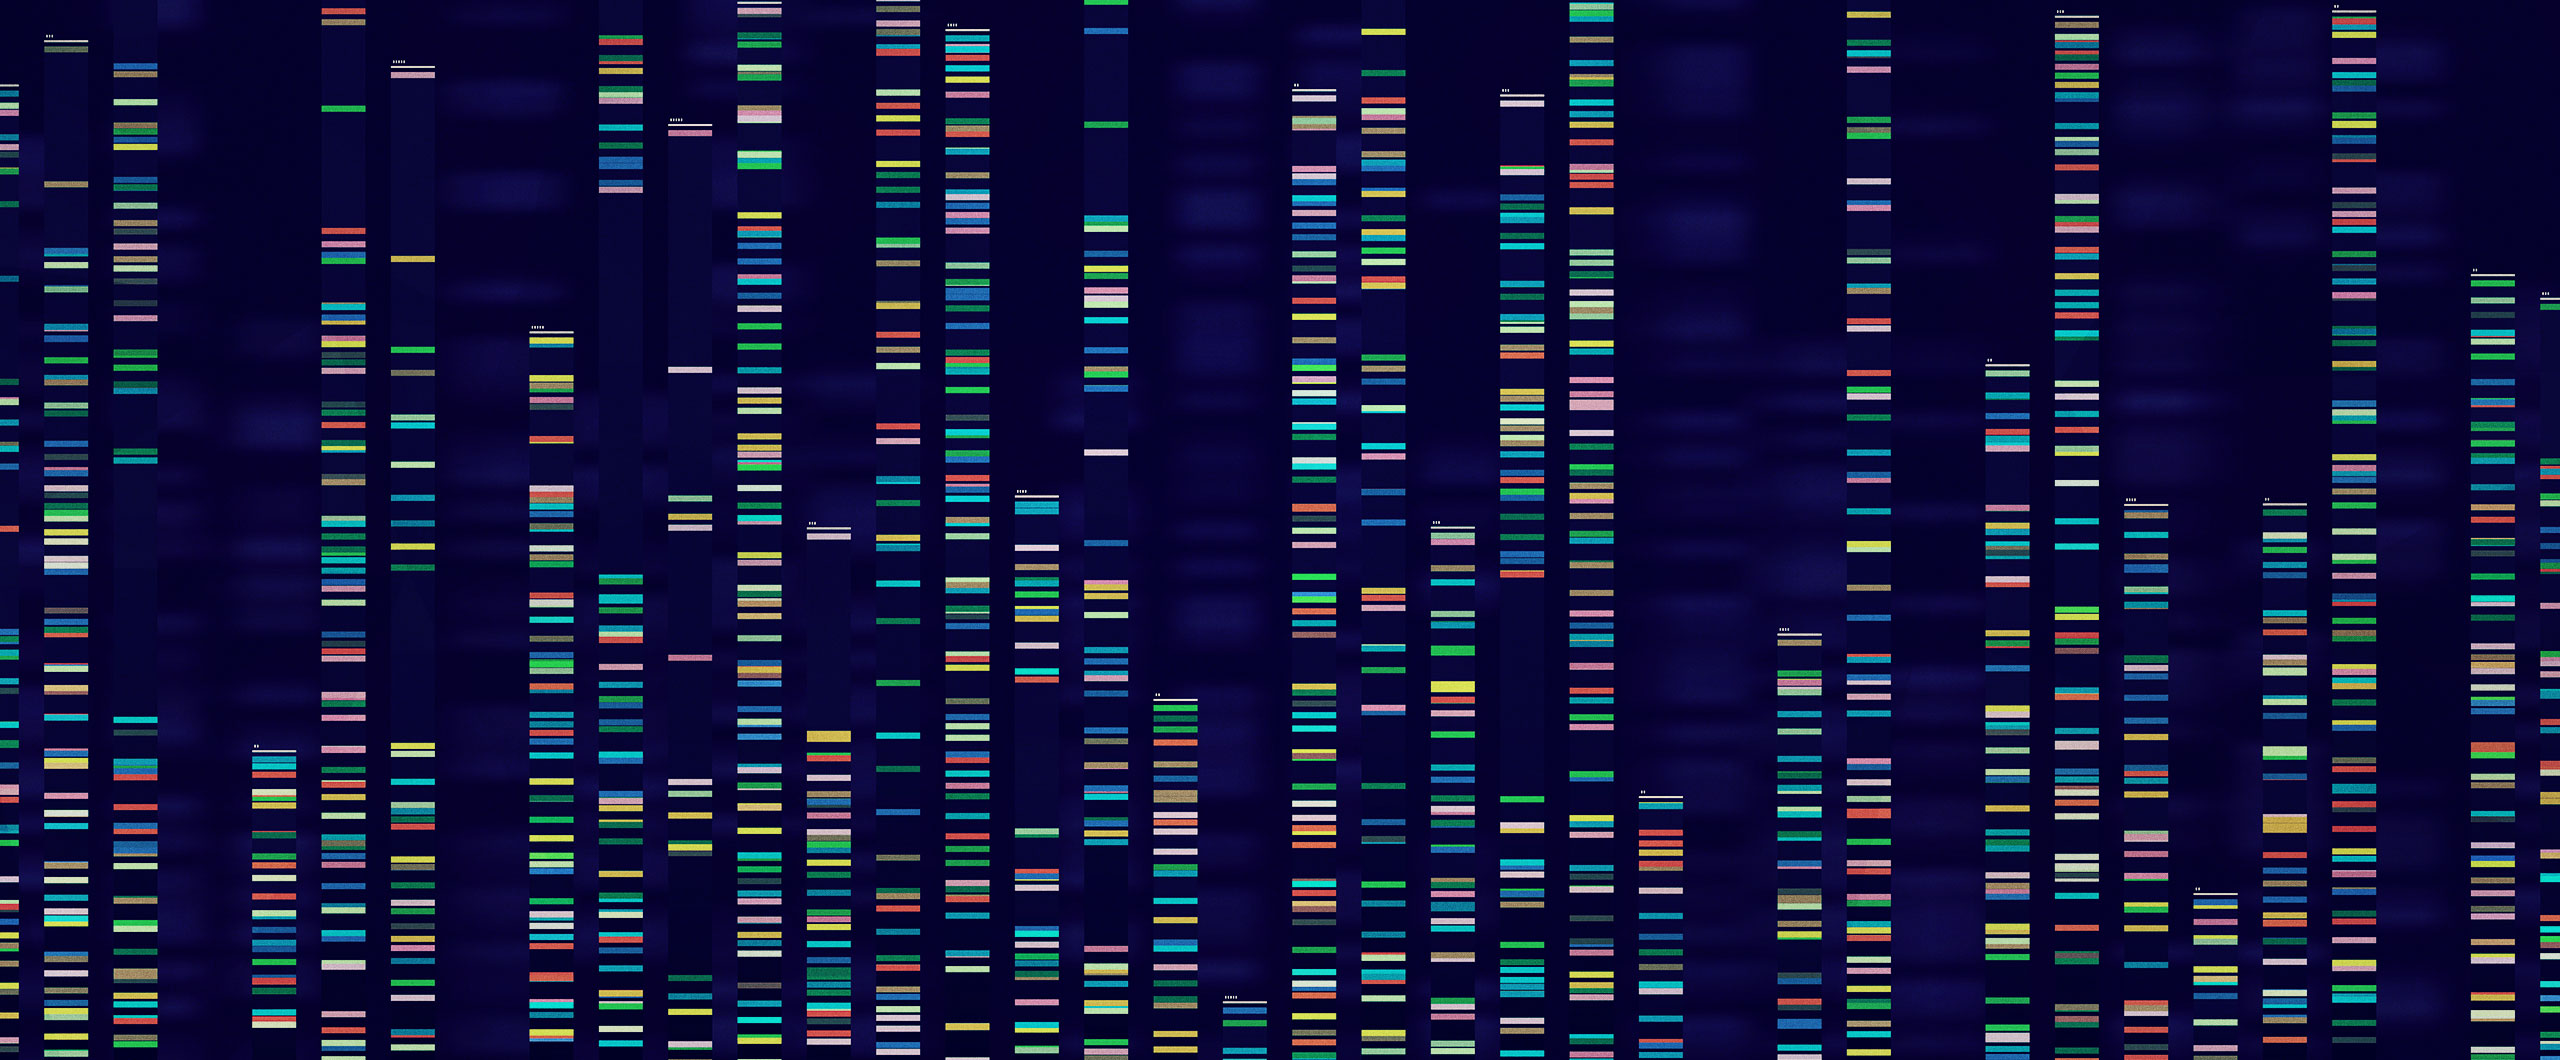 Researchers Find Hundreds Of New Genes In The Human Genome 